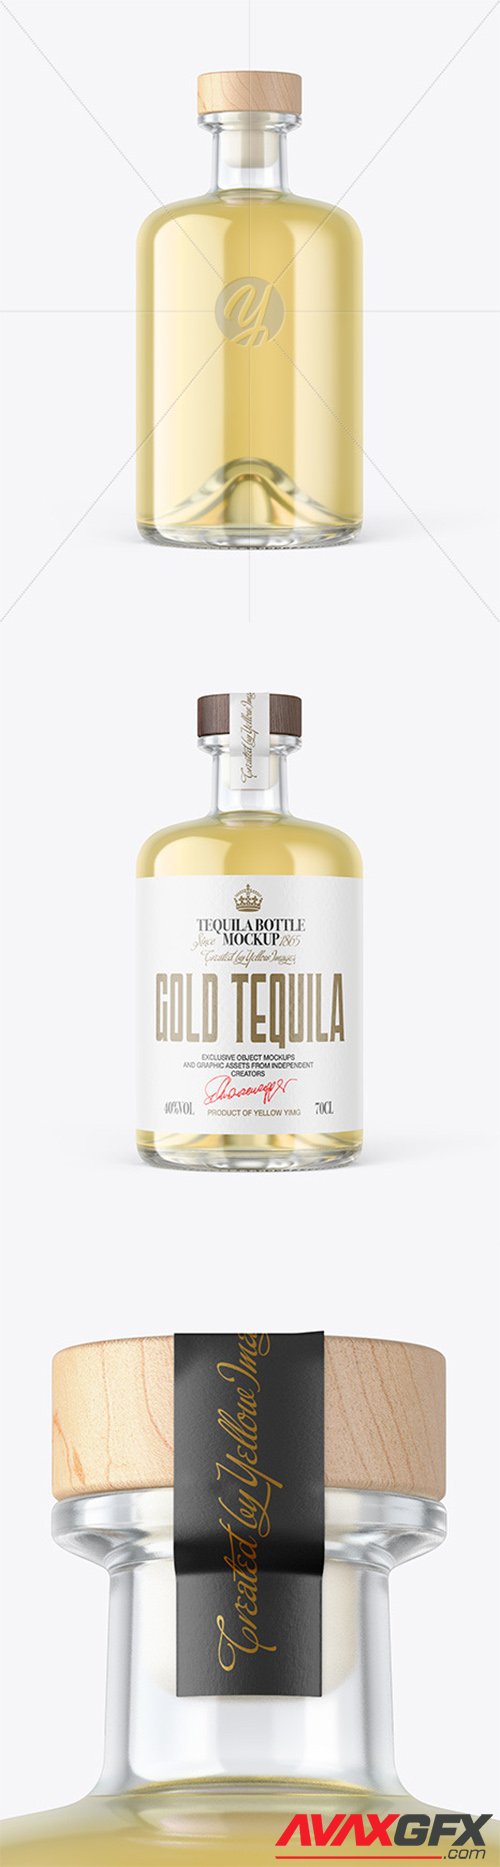 Gold Tequila Bottle with Wooden Cap Mockup 79841